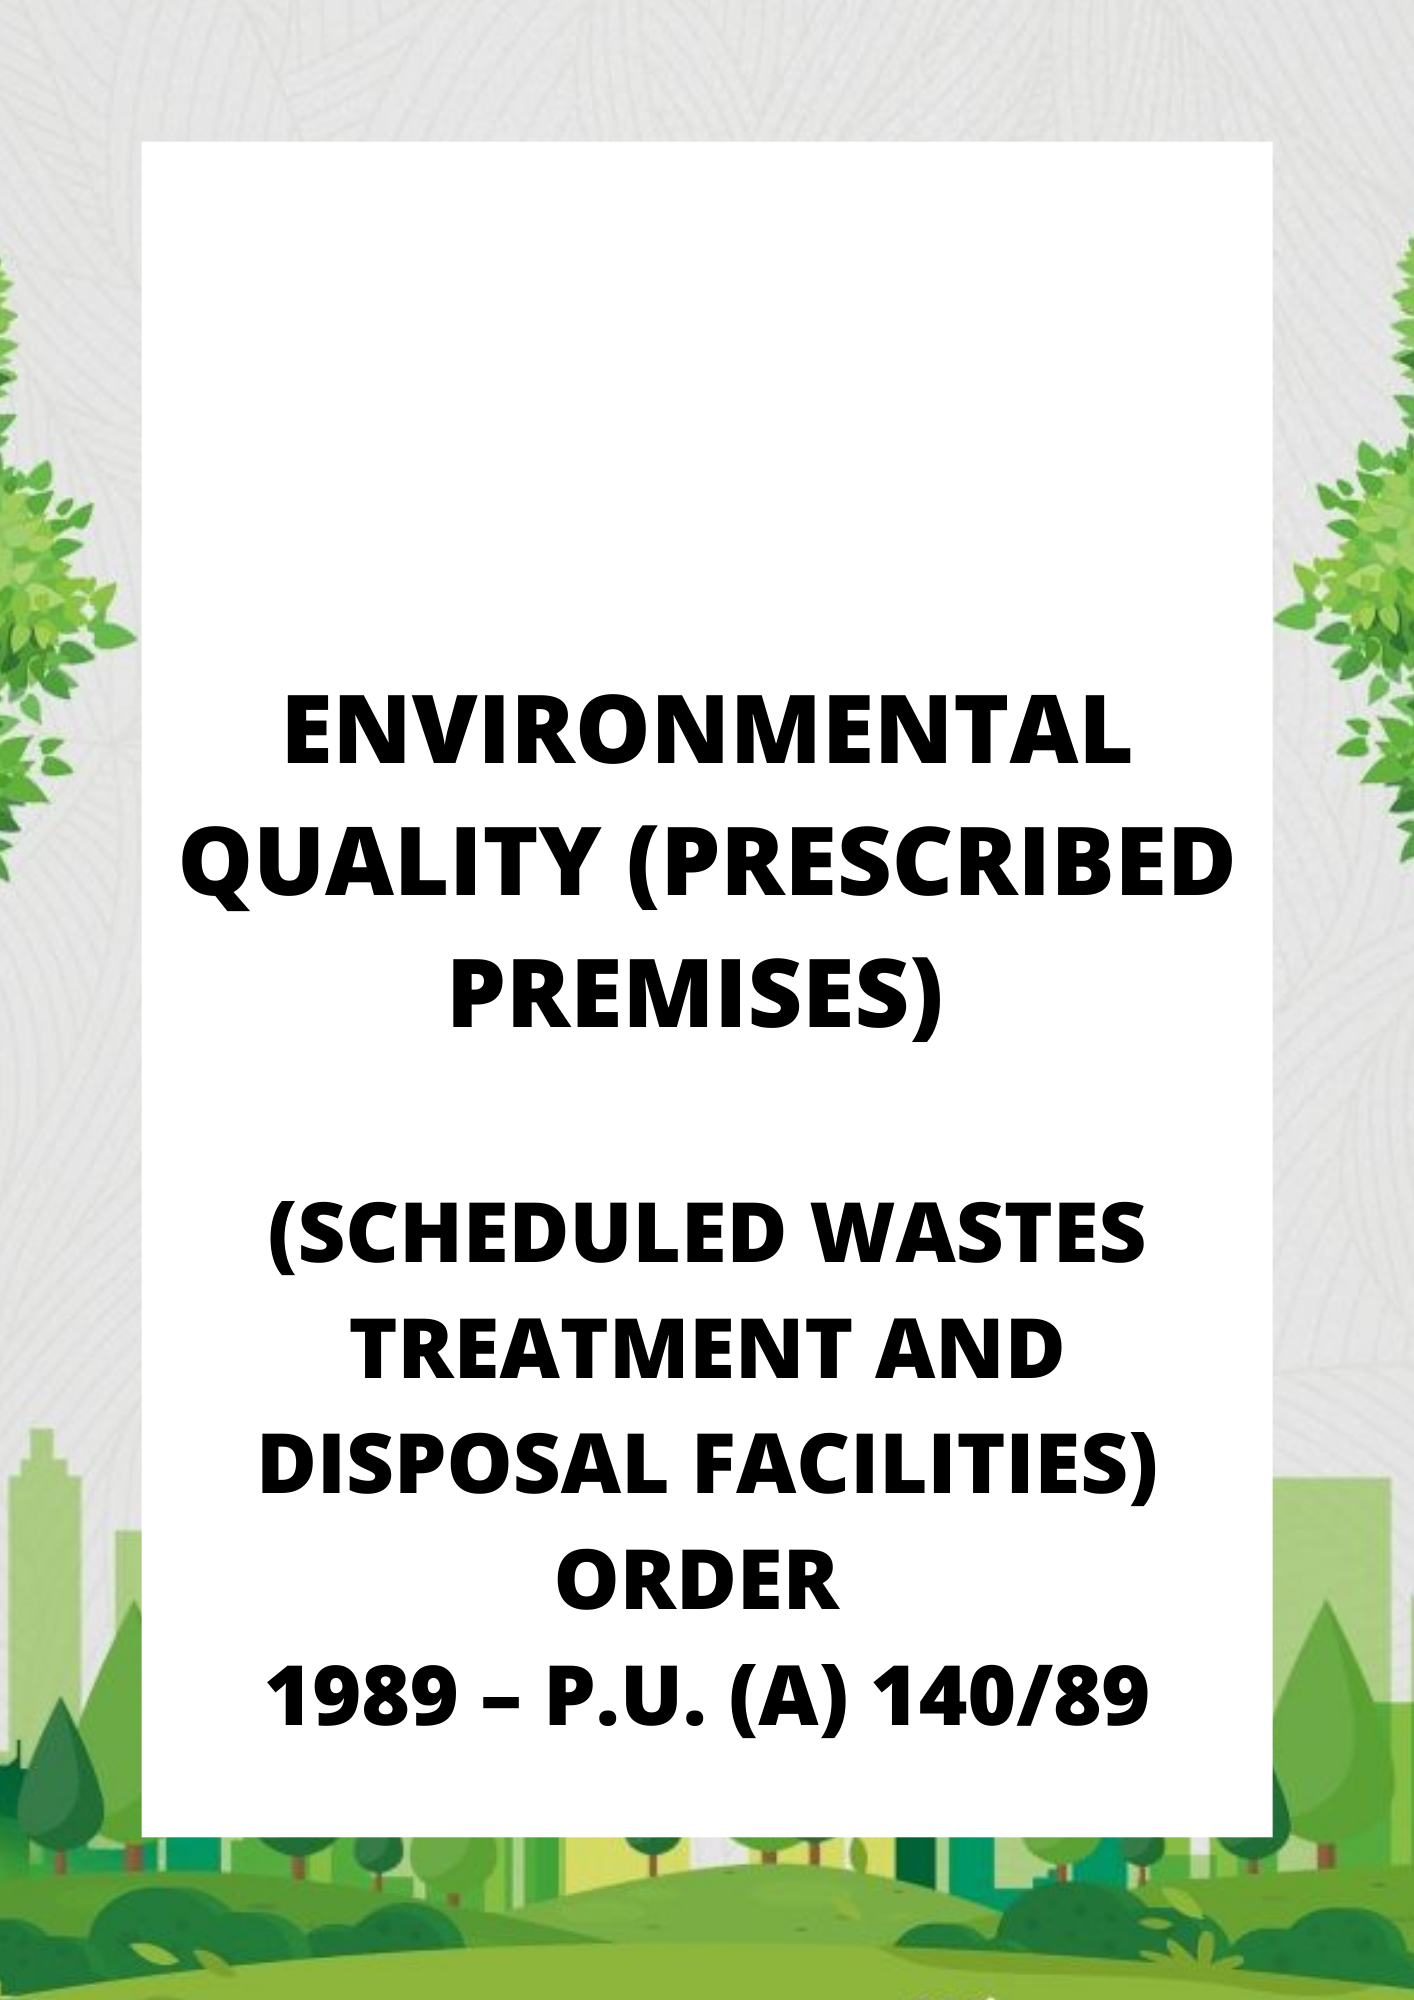 Environmental Quality (Prescribed Premises) (Scheduled Wastes Treatment and Disposal Facilities) Order 1989 – P.U. (A) 14089 (1)